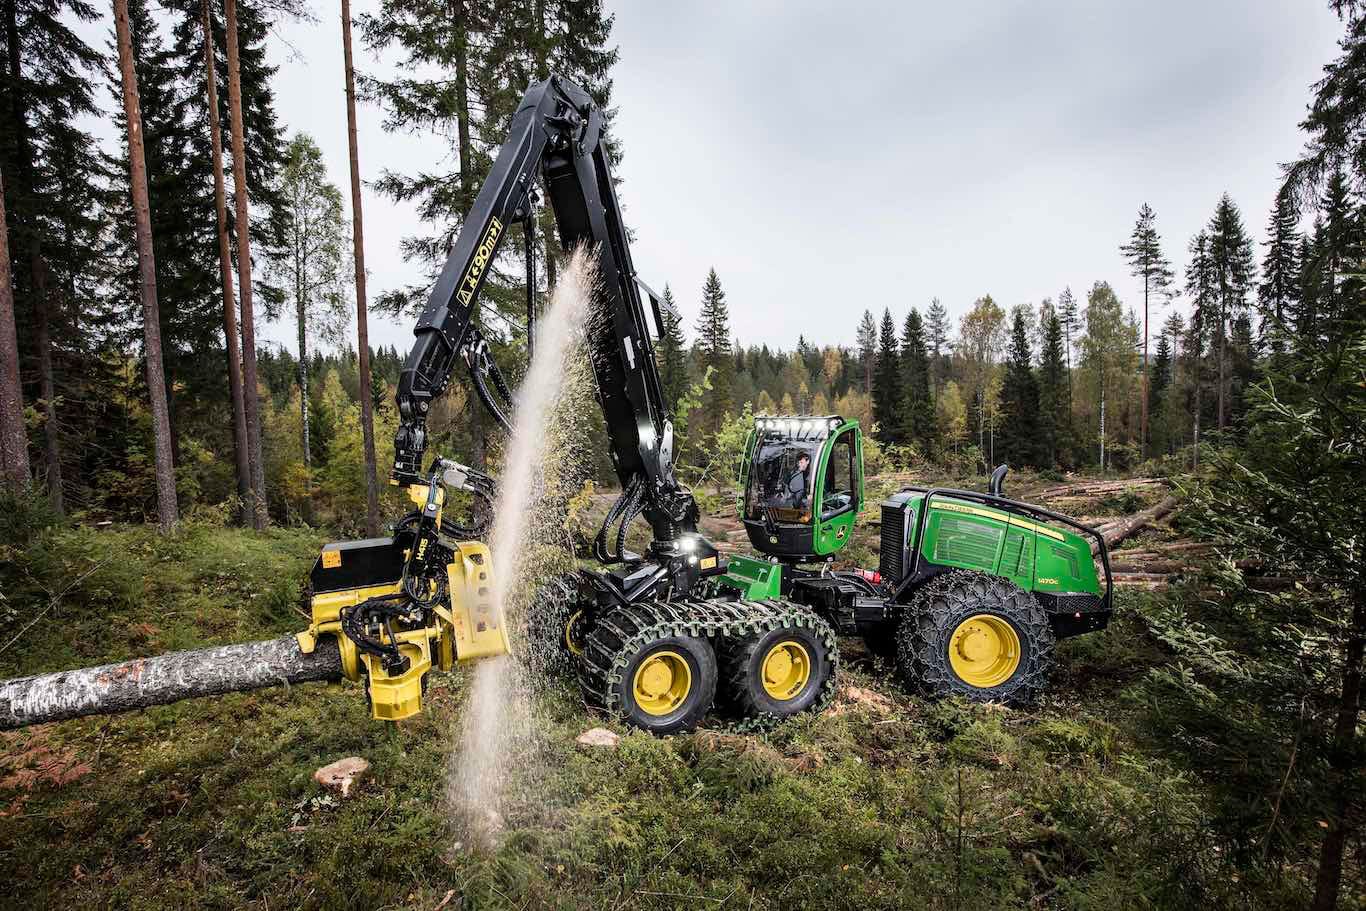 https://www.deere.com/assets/images/common/our-company/news/1470G_3.jpg